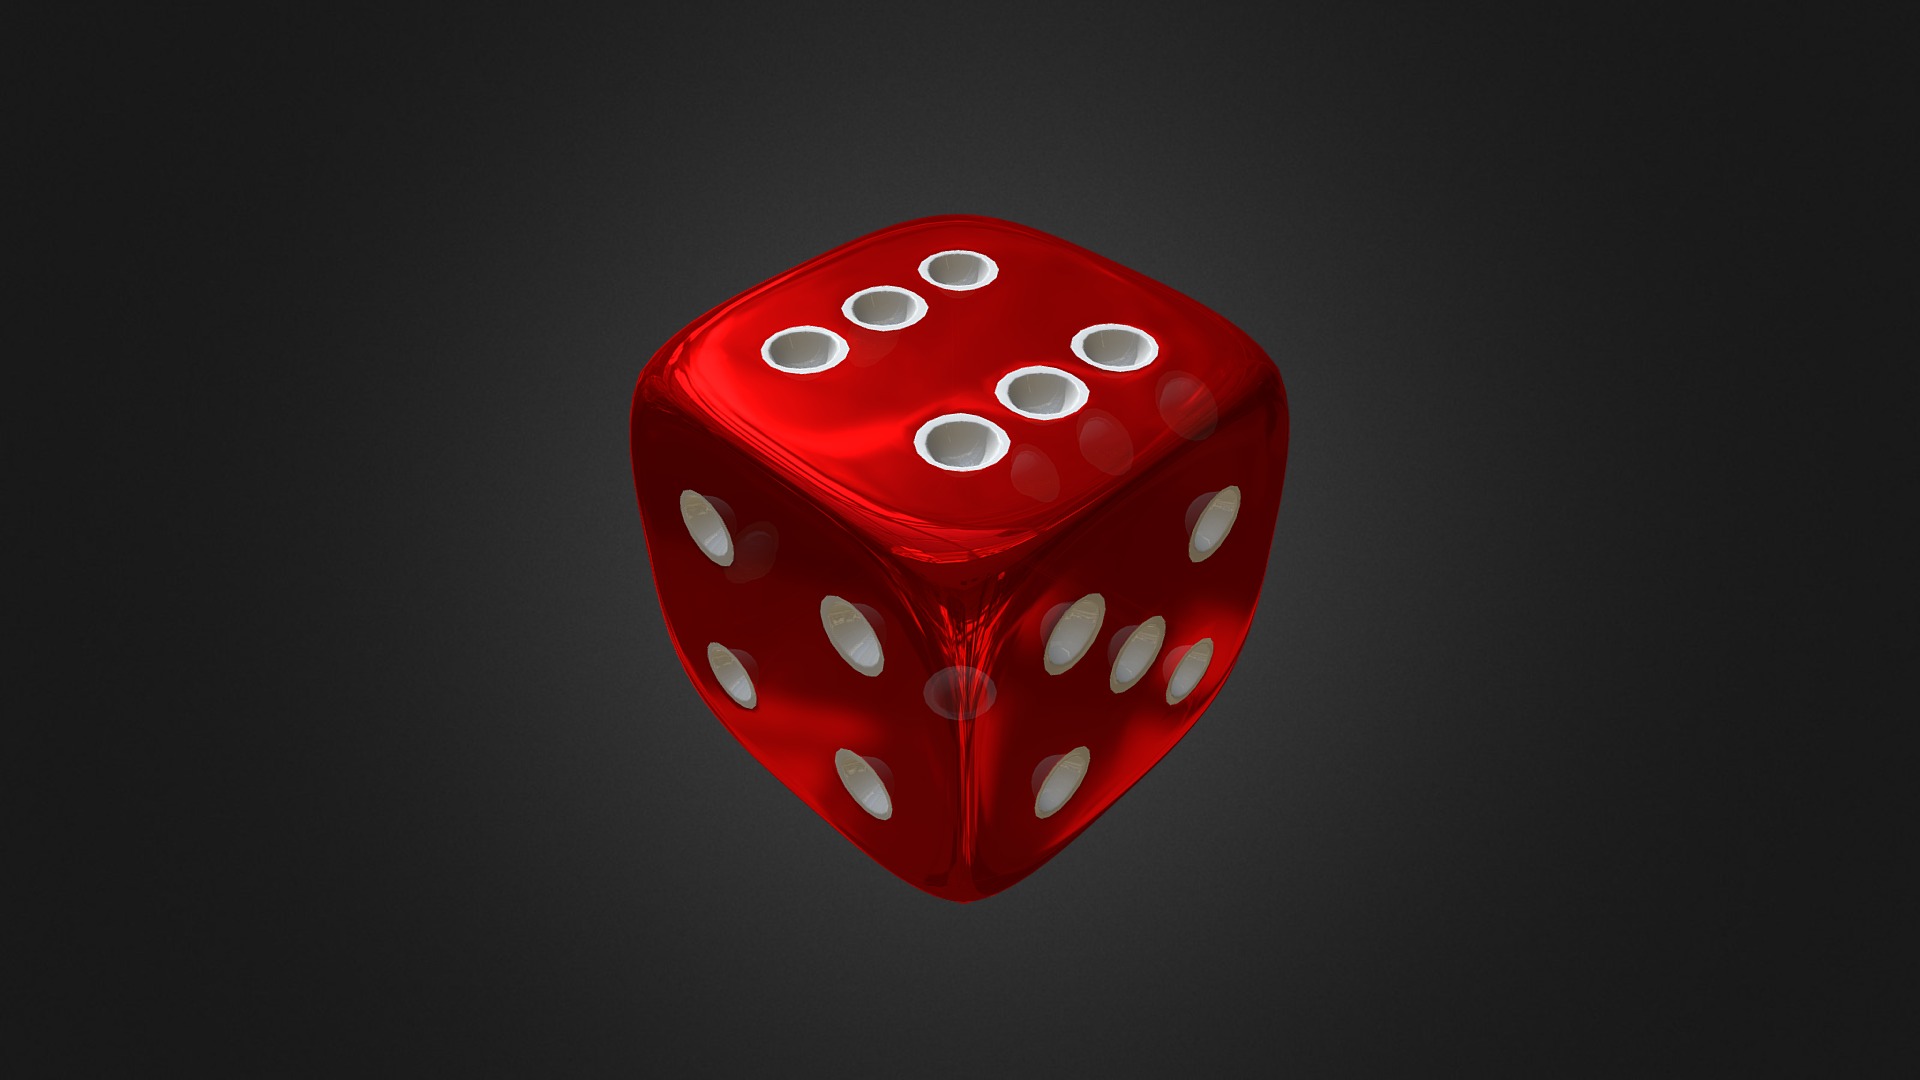 3D model Dice - This is a 3D model of the Dice. The 3D model is about a red dice with white dots.